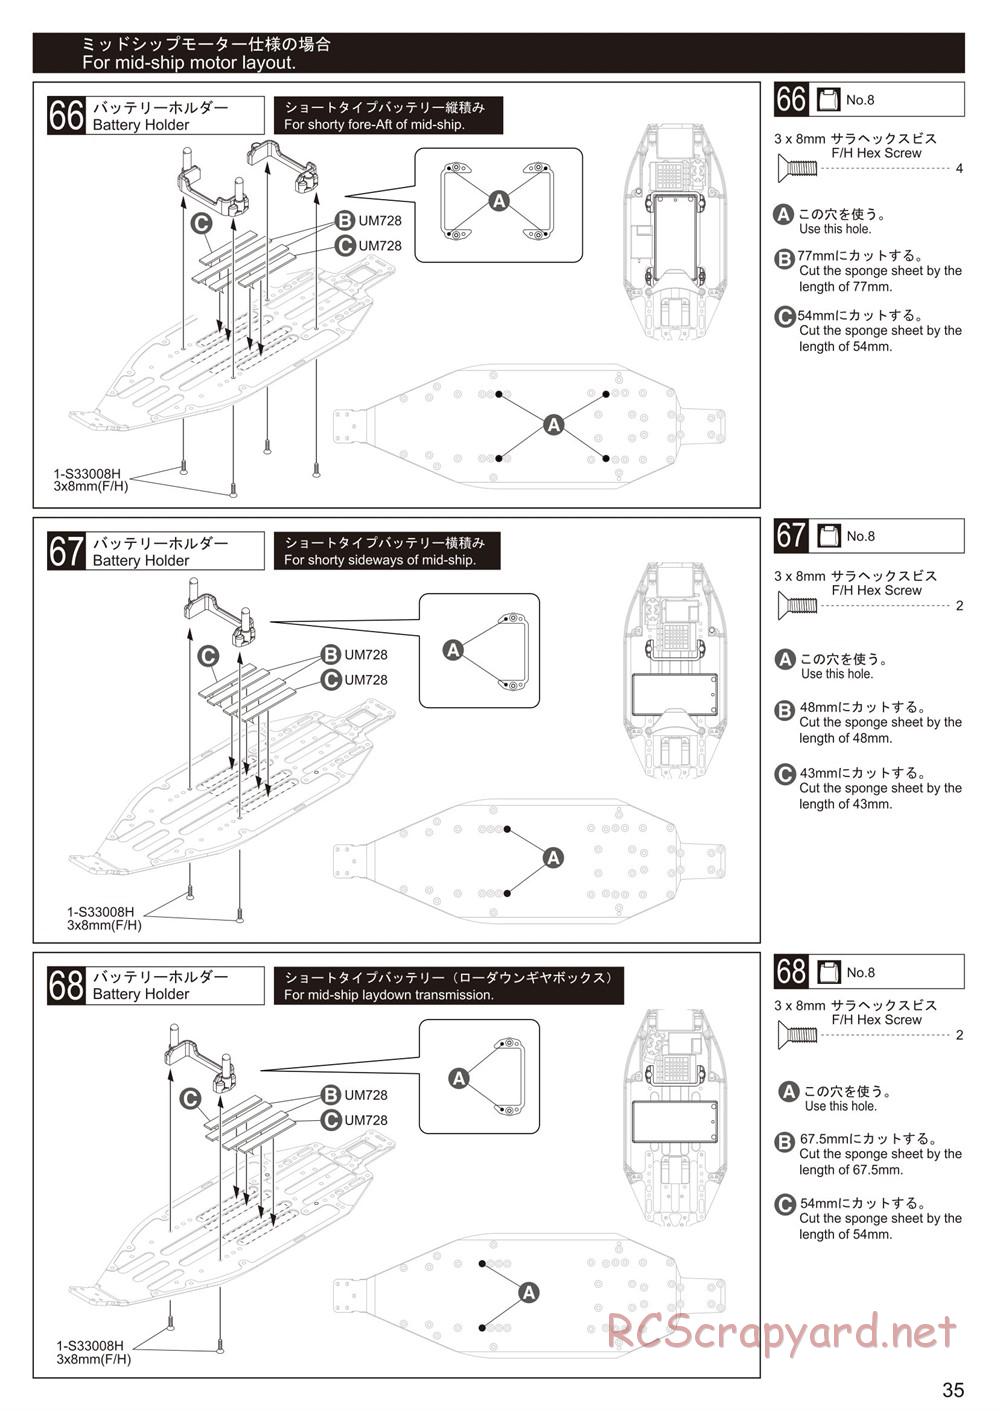 Kyosho - Ultima RB6.6 - Manual - Page 35